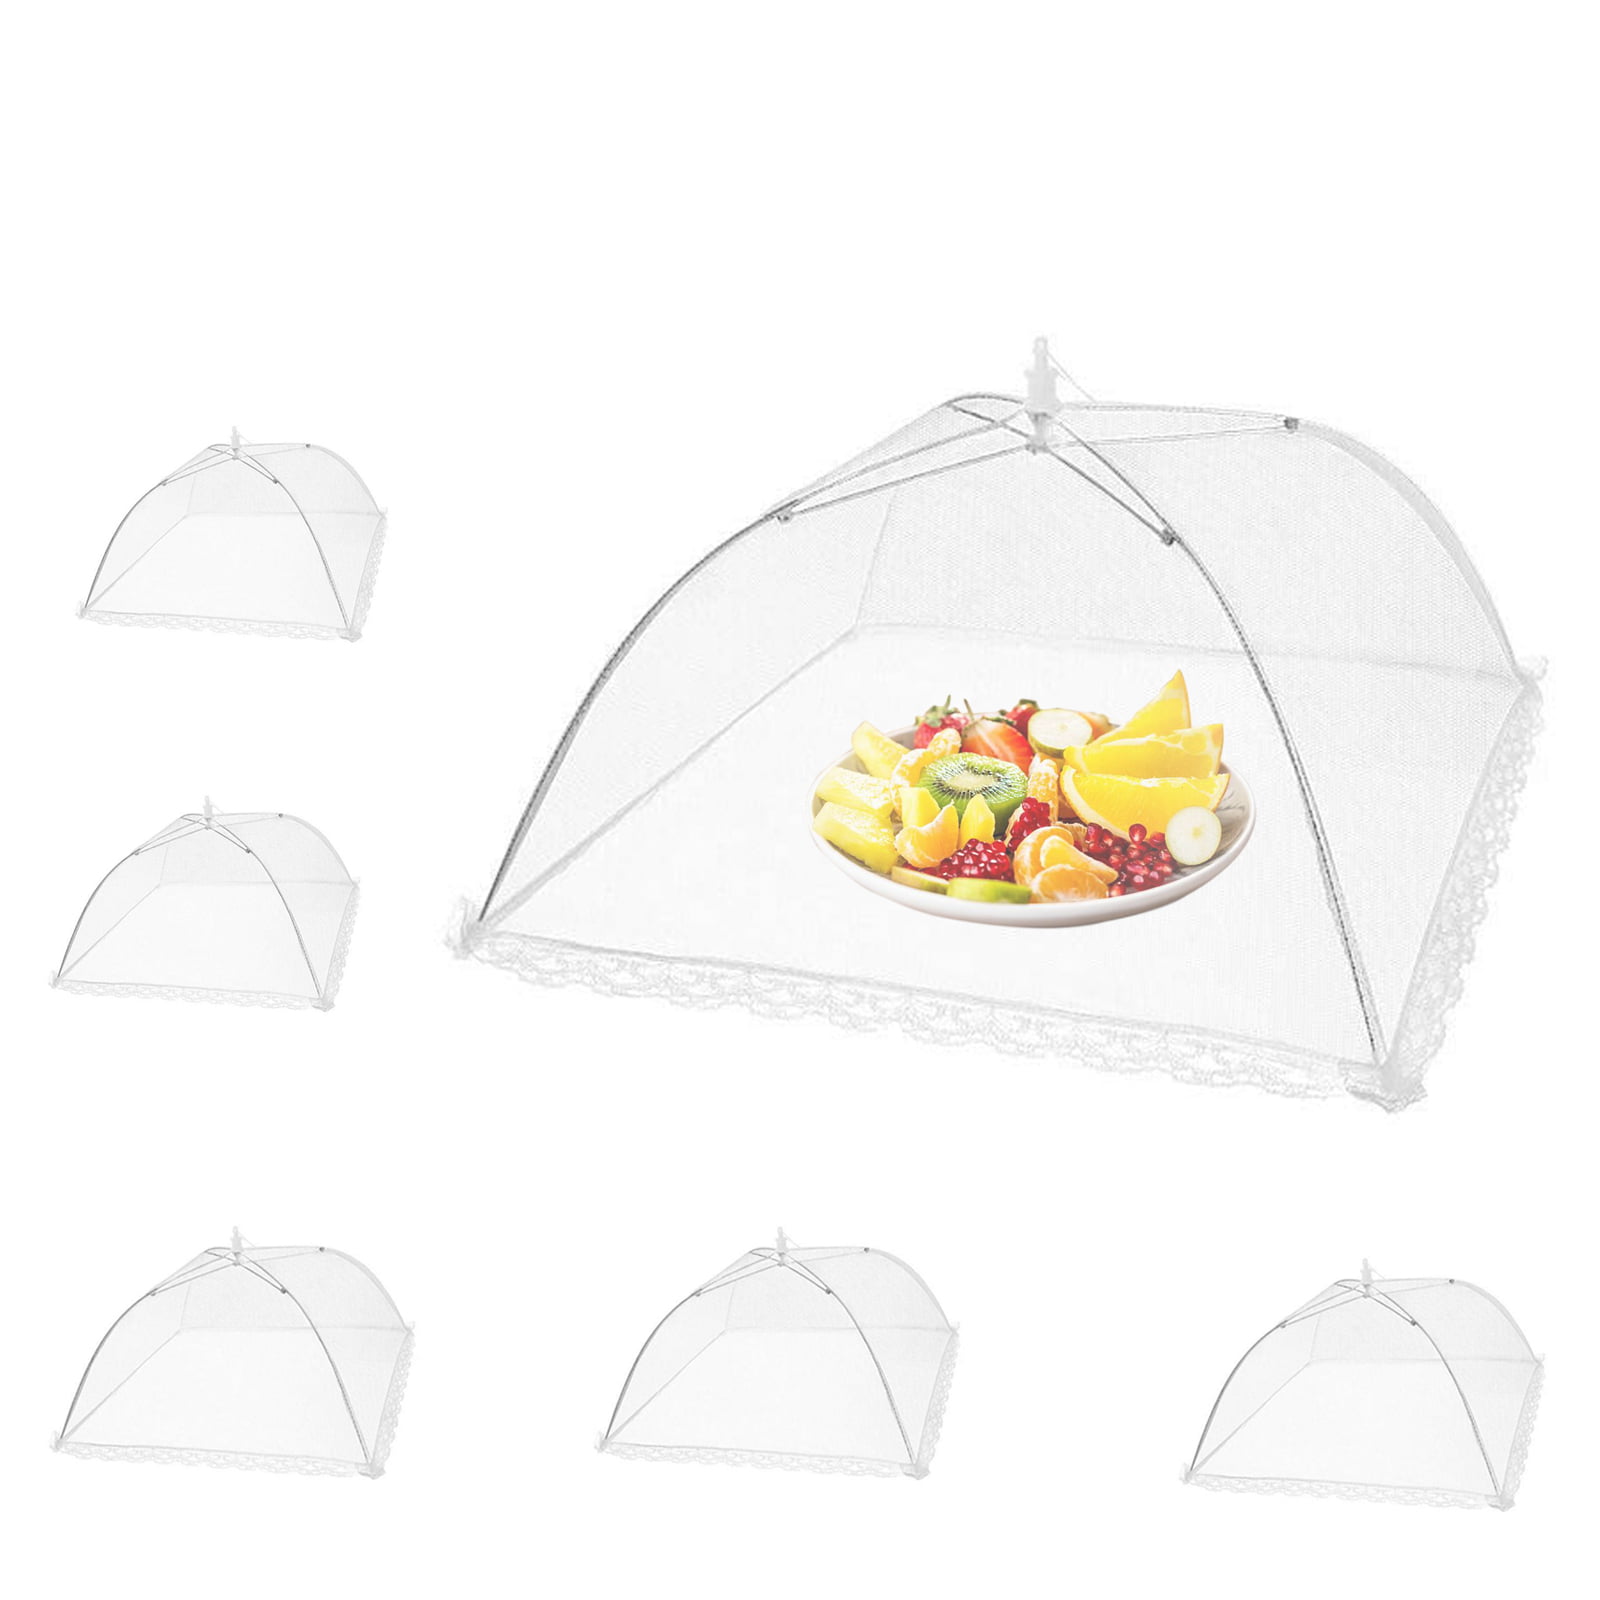 New Coleman White Mesh Food Tent Canopy Cover for Outdoor BBQ Camping & Picnics 